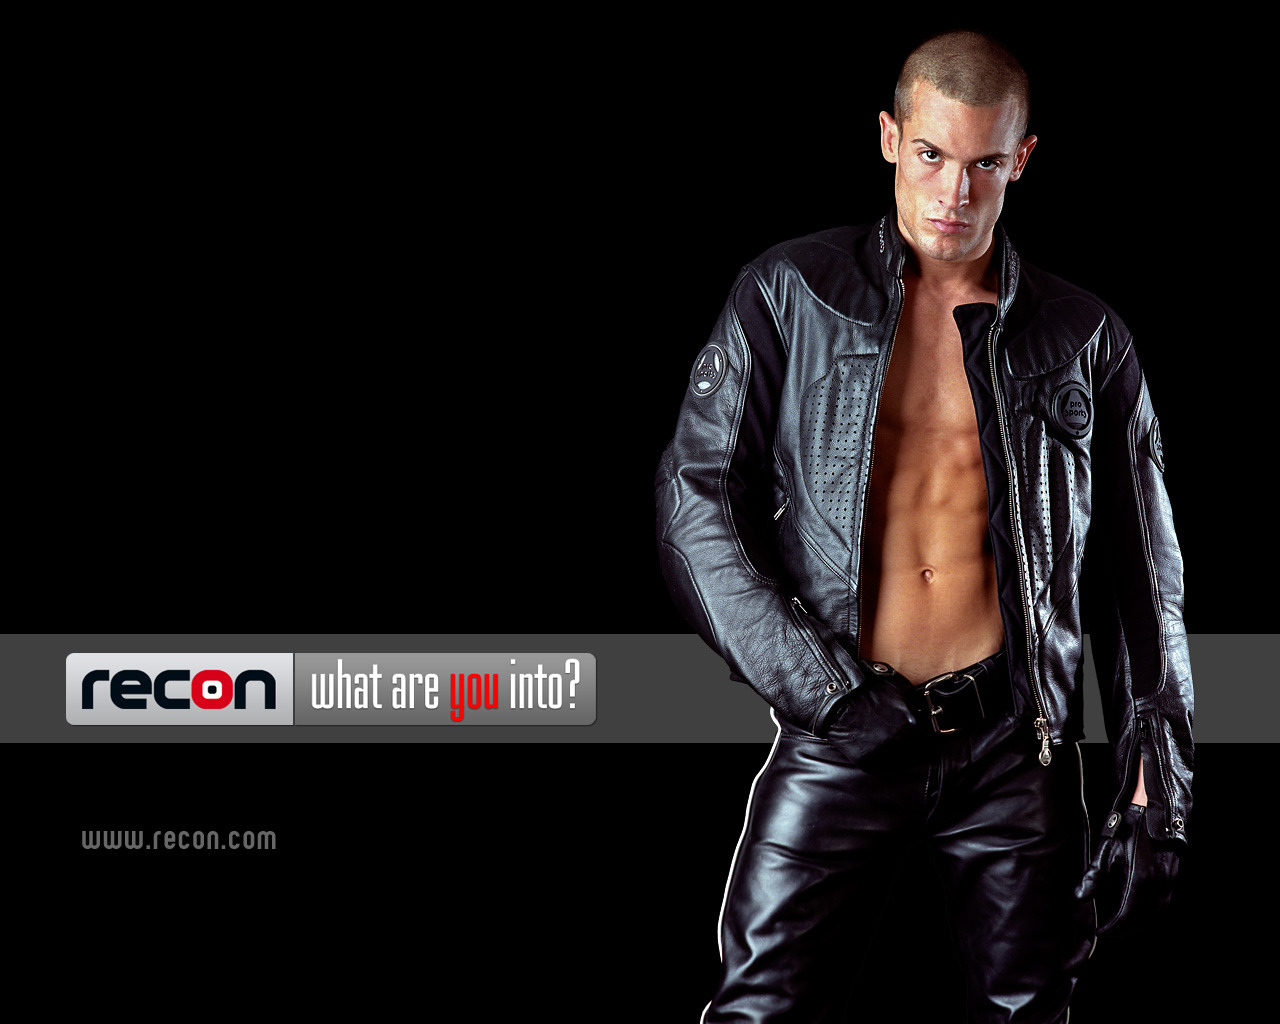 SHARE! Recon is the world&rsquo;s largest hook up site for gay men into fetish